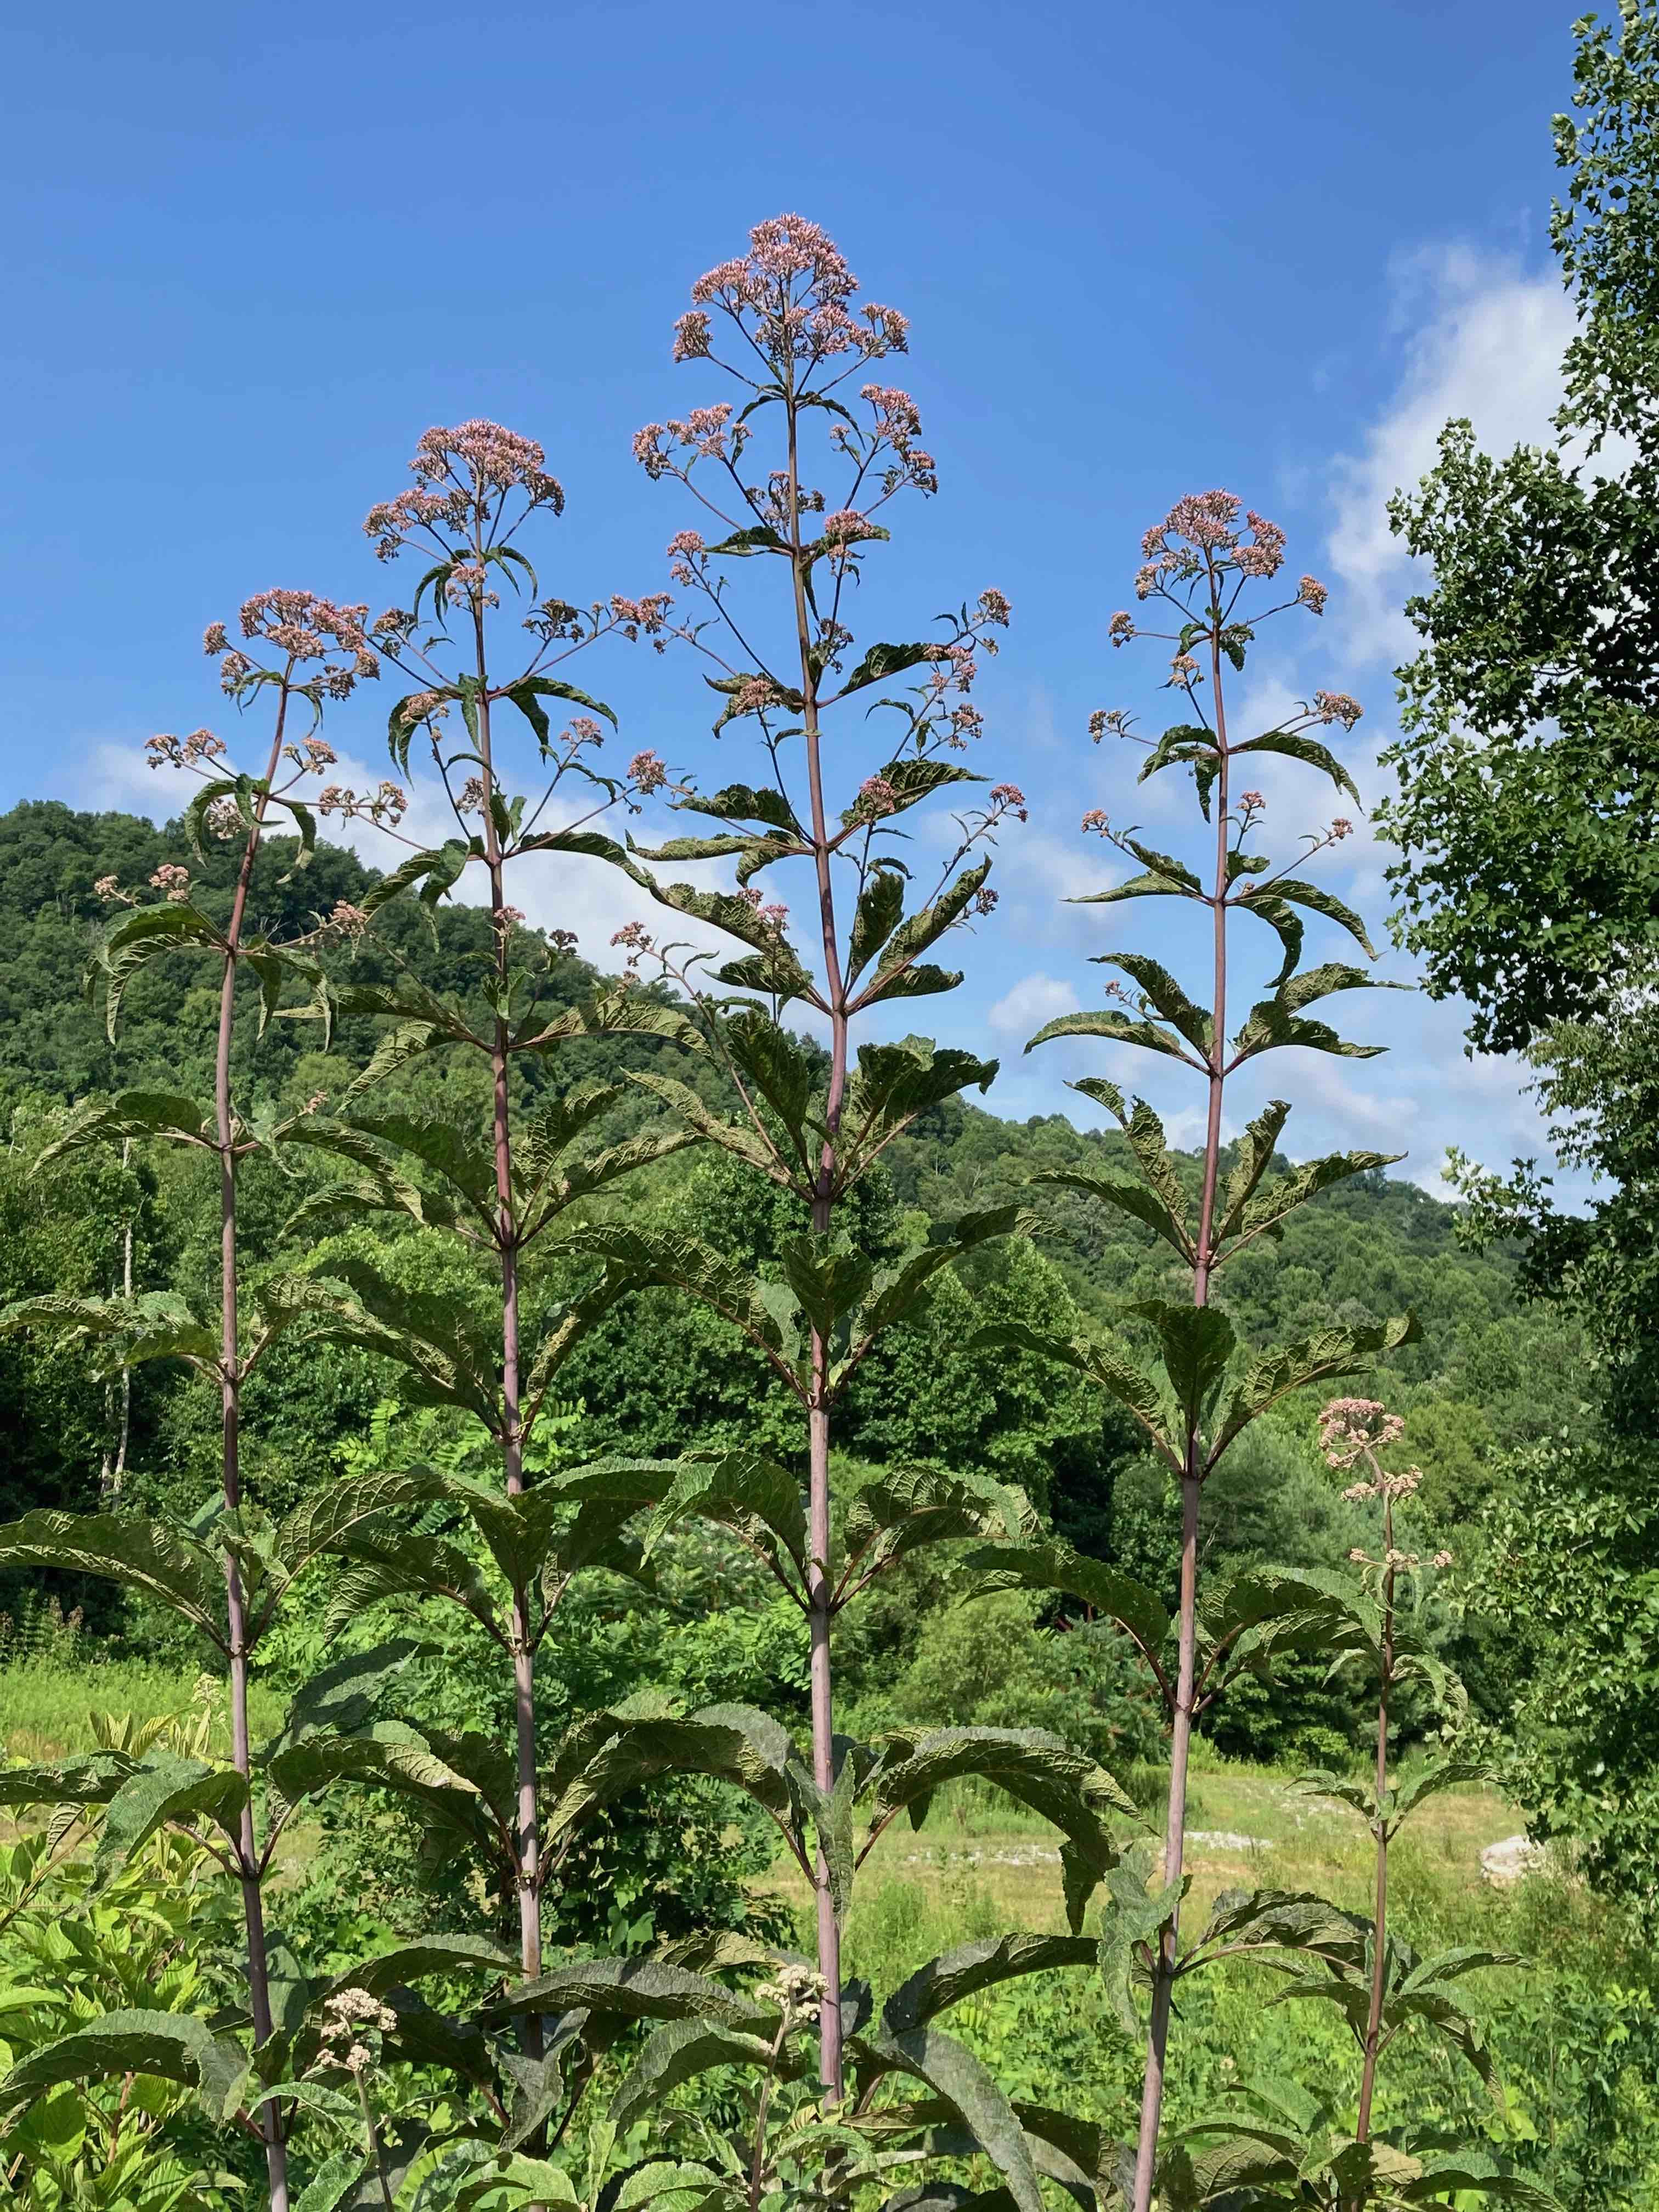 The Scientific Name is Eutrochium fistulosum  [= Eupatorium fistulosum]. You will likely hear them called Hollow-stem Joe-Pye-weed, Queen of the Meadow. This picture shows the Our tallest Joe-pye-weed. Sturdy purple stems are hollow and with a glaucous bloom. Plants are rhizomatous. of Eutrochium fistulosum  [= Eupatorium fistulosum]